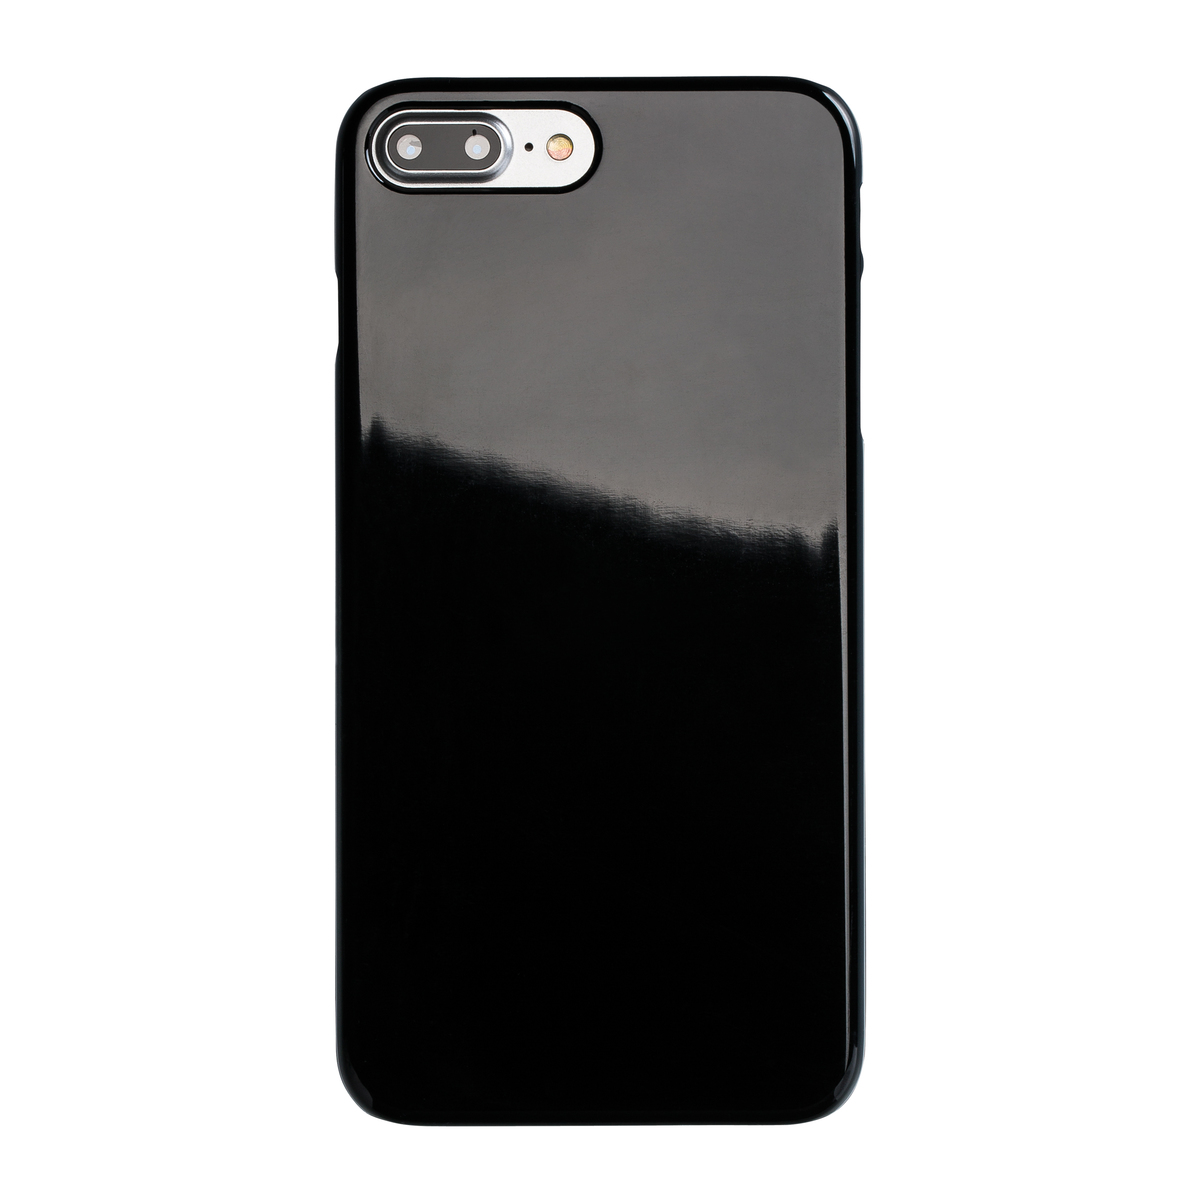 LM Smartphonecover REFLECTS-COVER XII IPhone 7 Plus BLACK schwarz